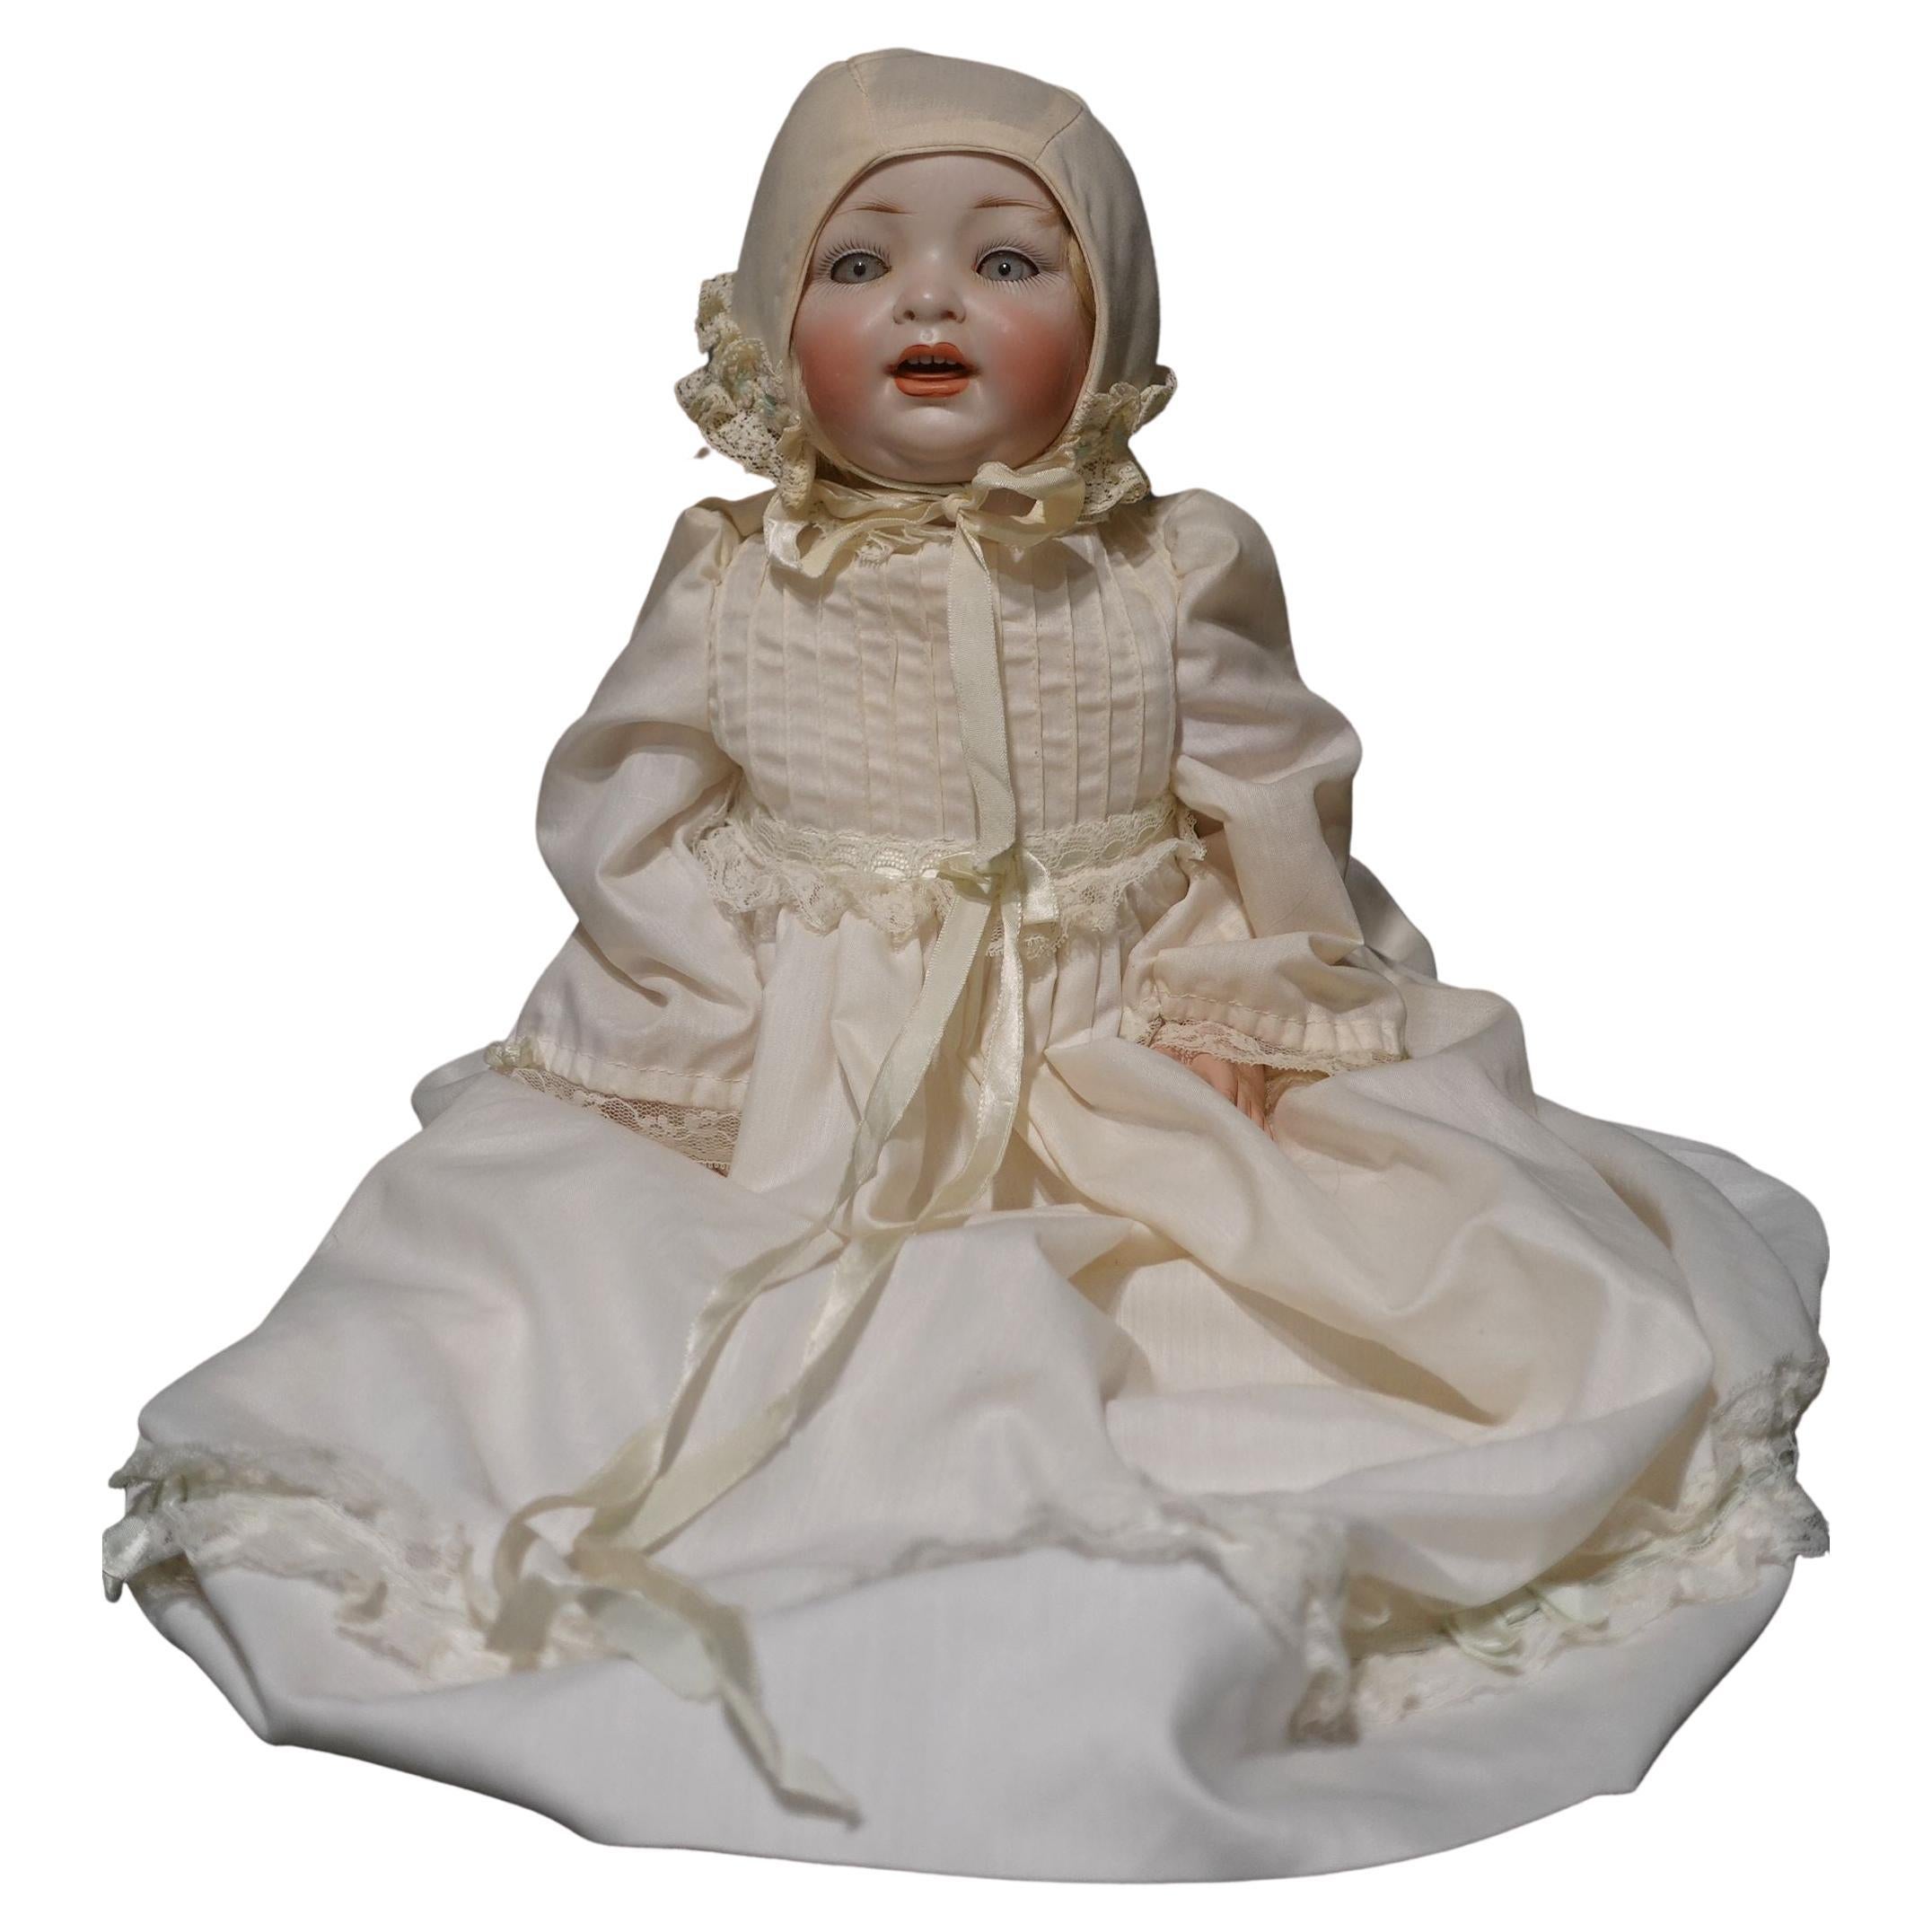 Antique German Bisque Doll #152/6 "Our Baby" by Hertel Schwab for L.W & CO. For Sale